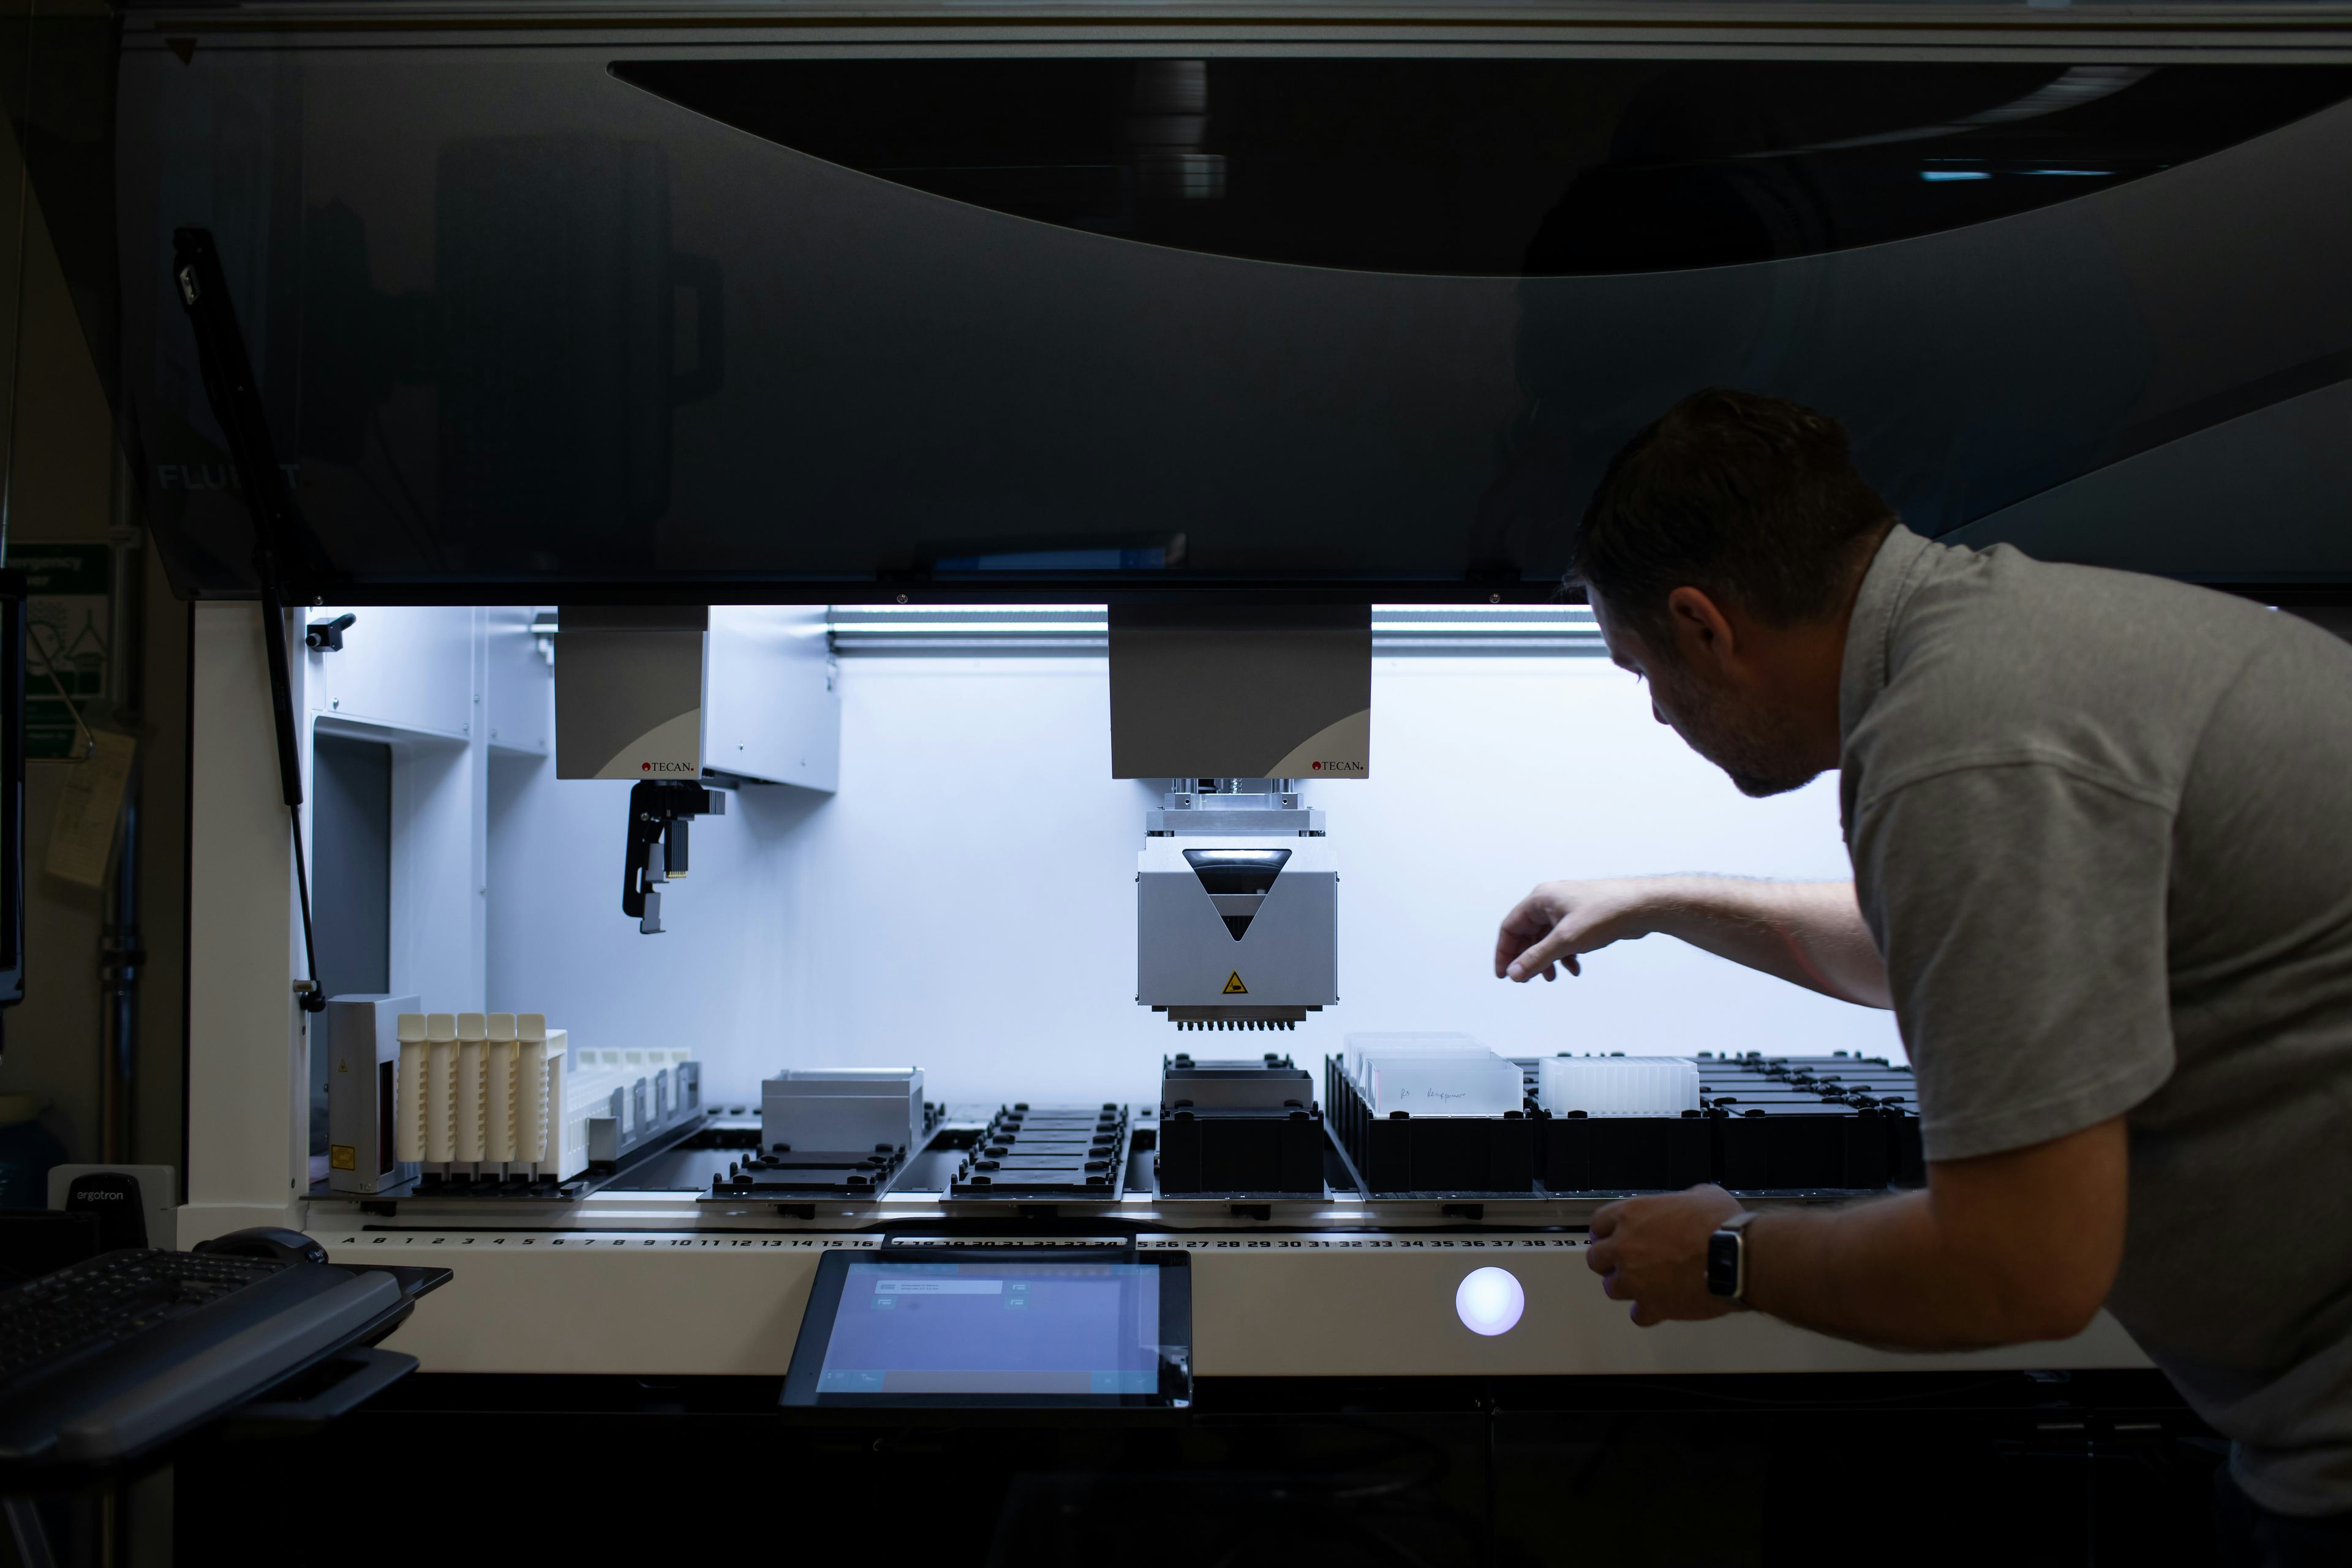 A scientist leans into a laboratory hood and moves samples under a robotic arm